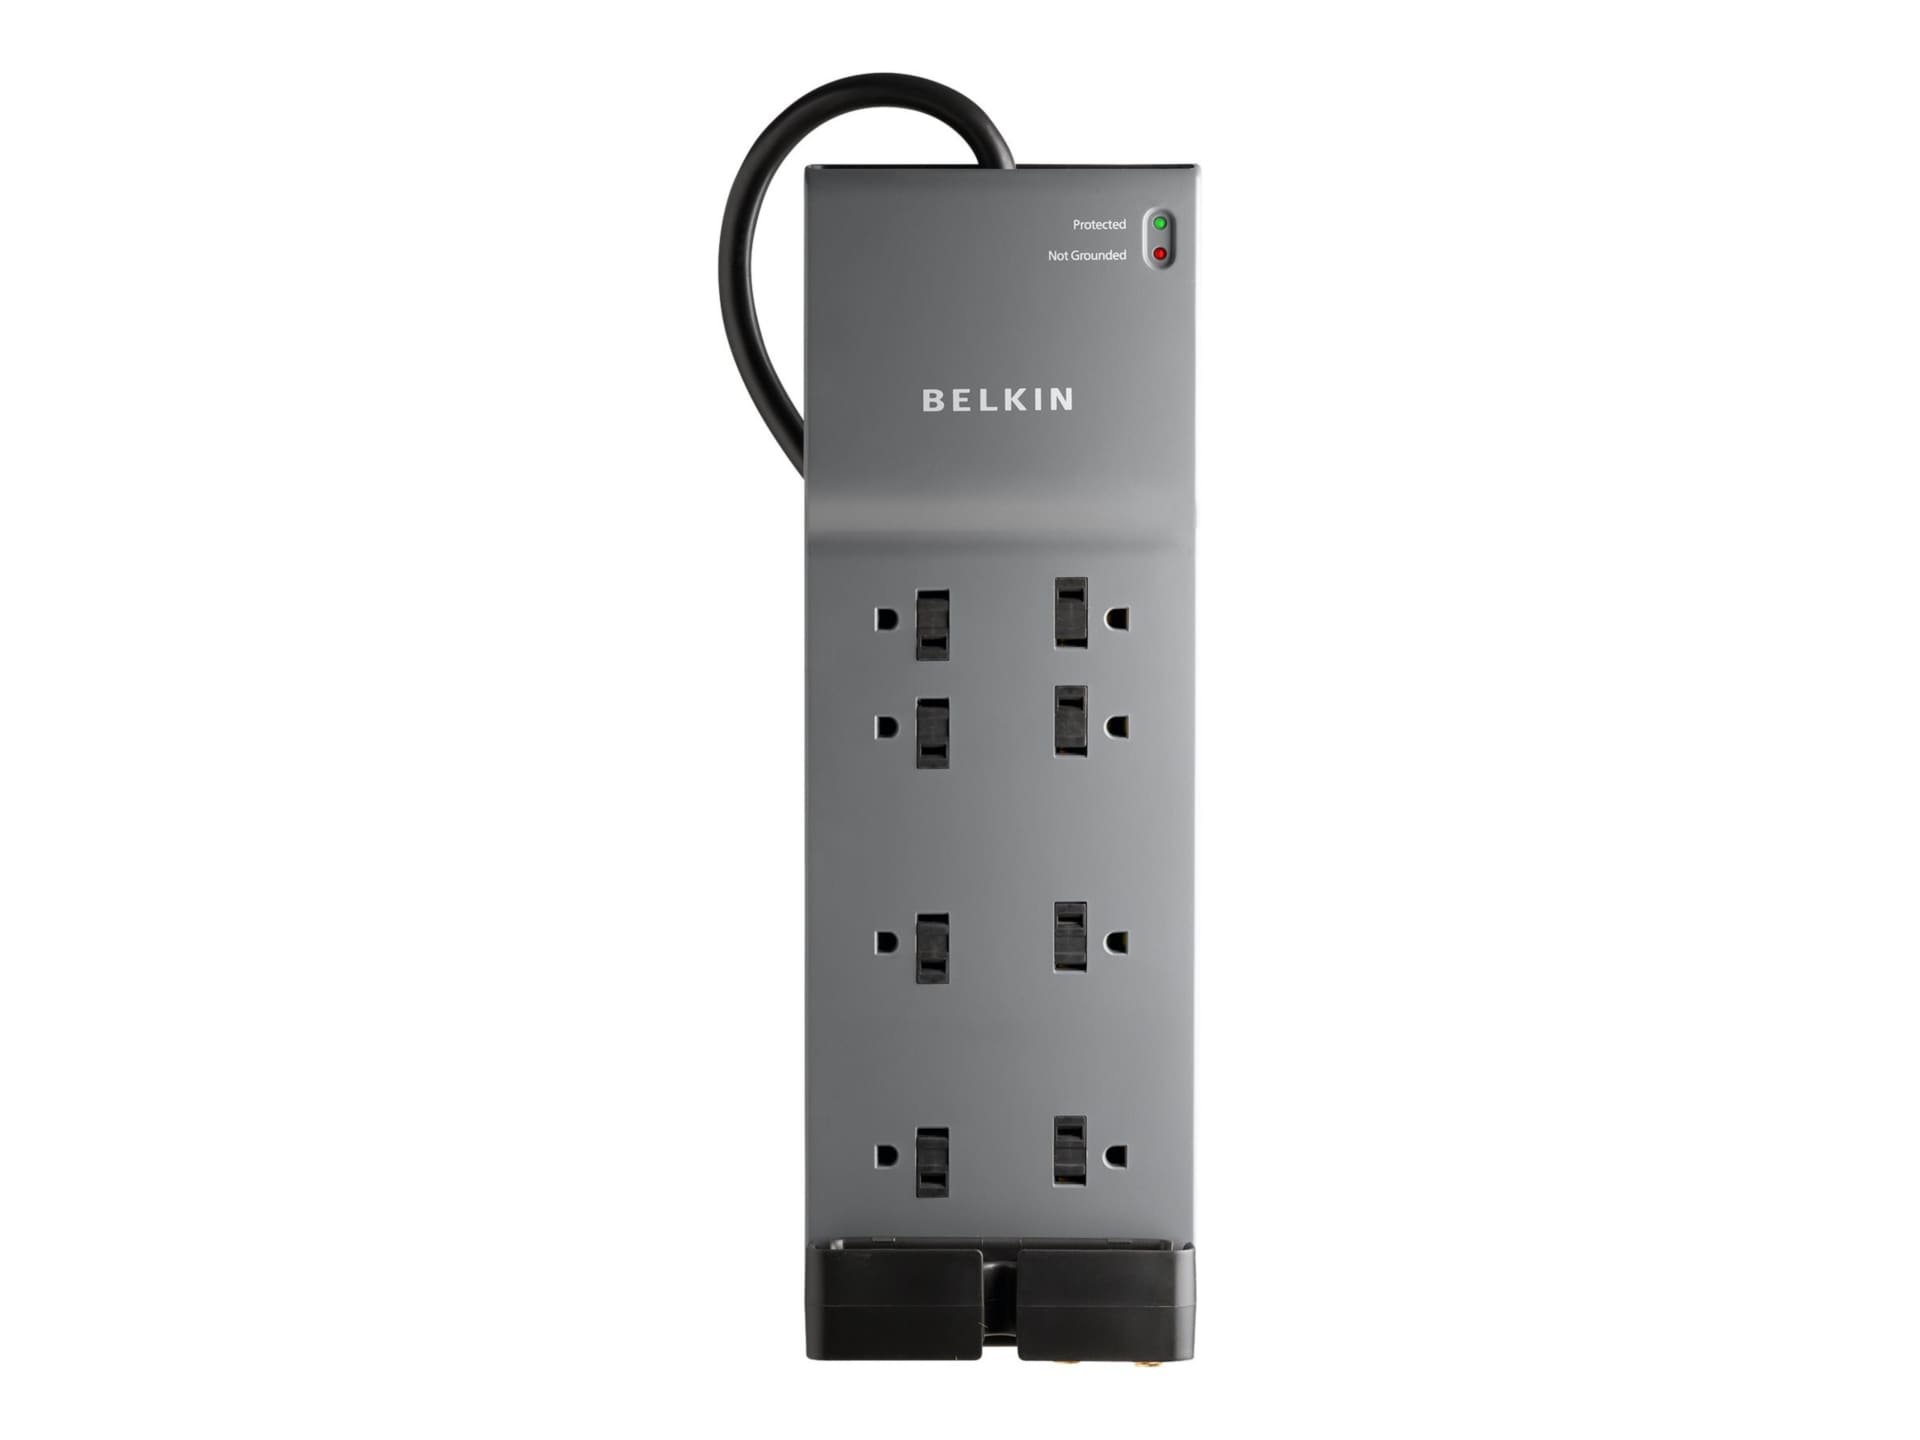 Belkin 8 Outlet Surge Protector with 6ft Power Cord - Black - 3550 Joules